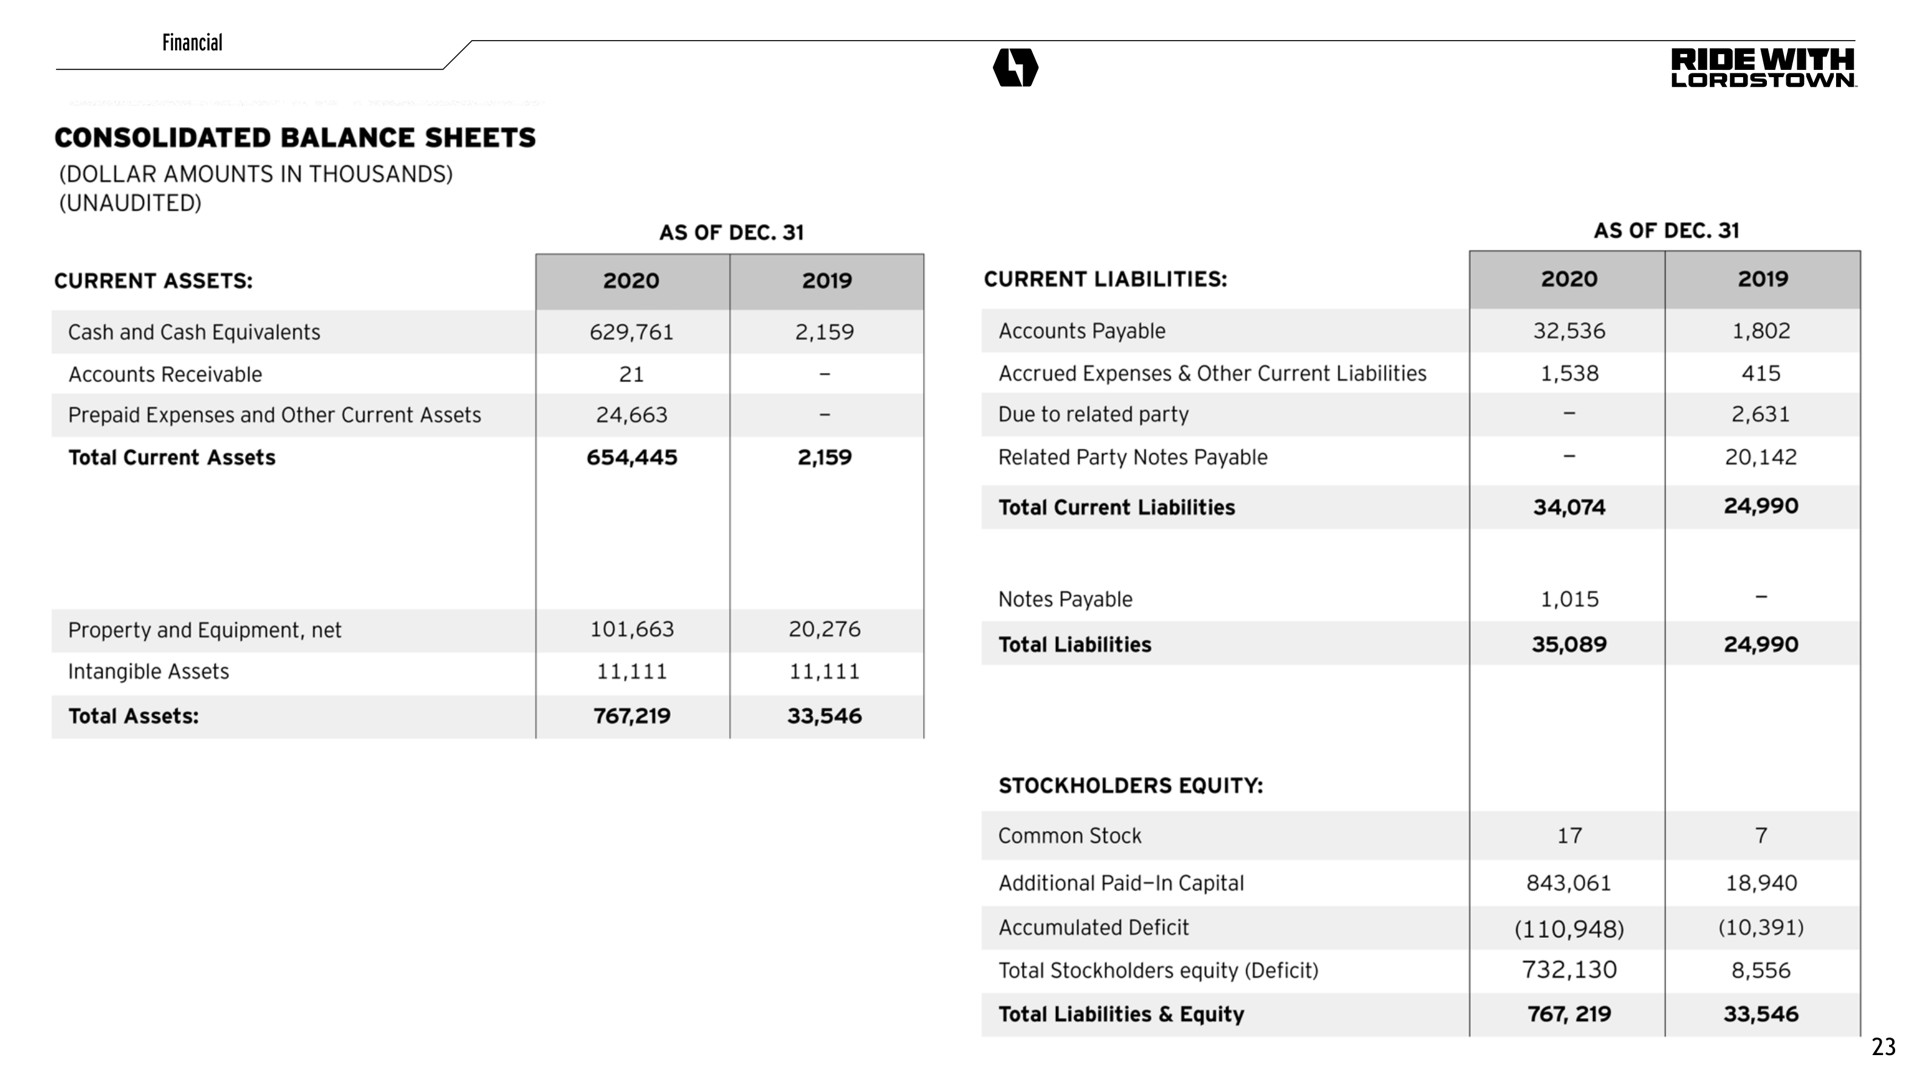 ride with consolidated balance sheets | Lordstown Motors